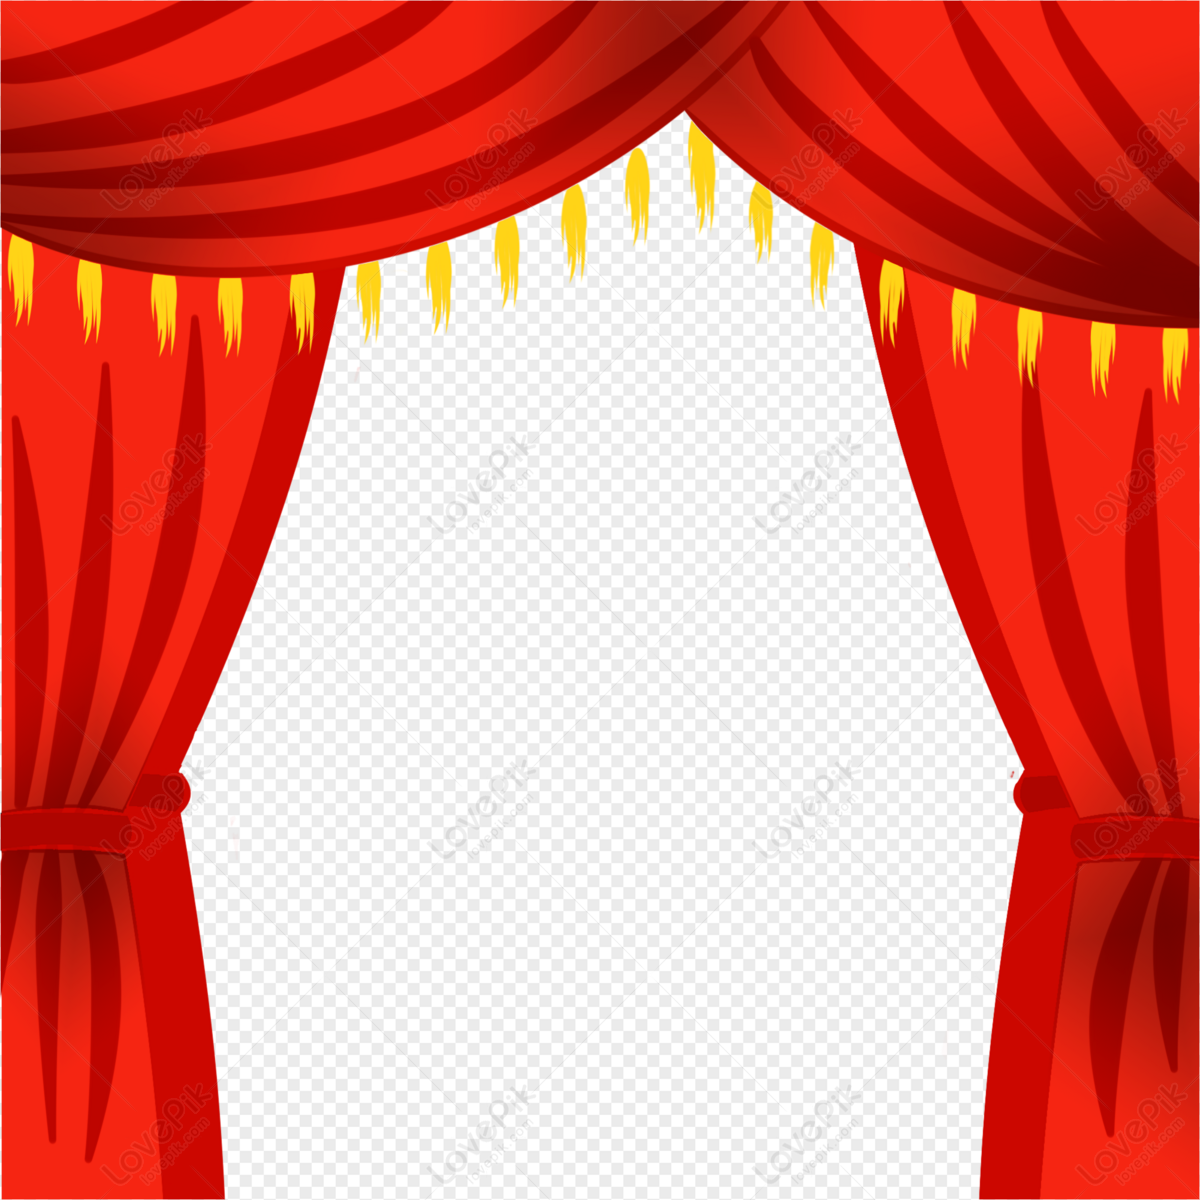 Hand Painted Red Chinese Style Stage Curtain PNG Image Free ...